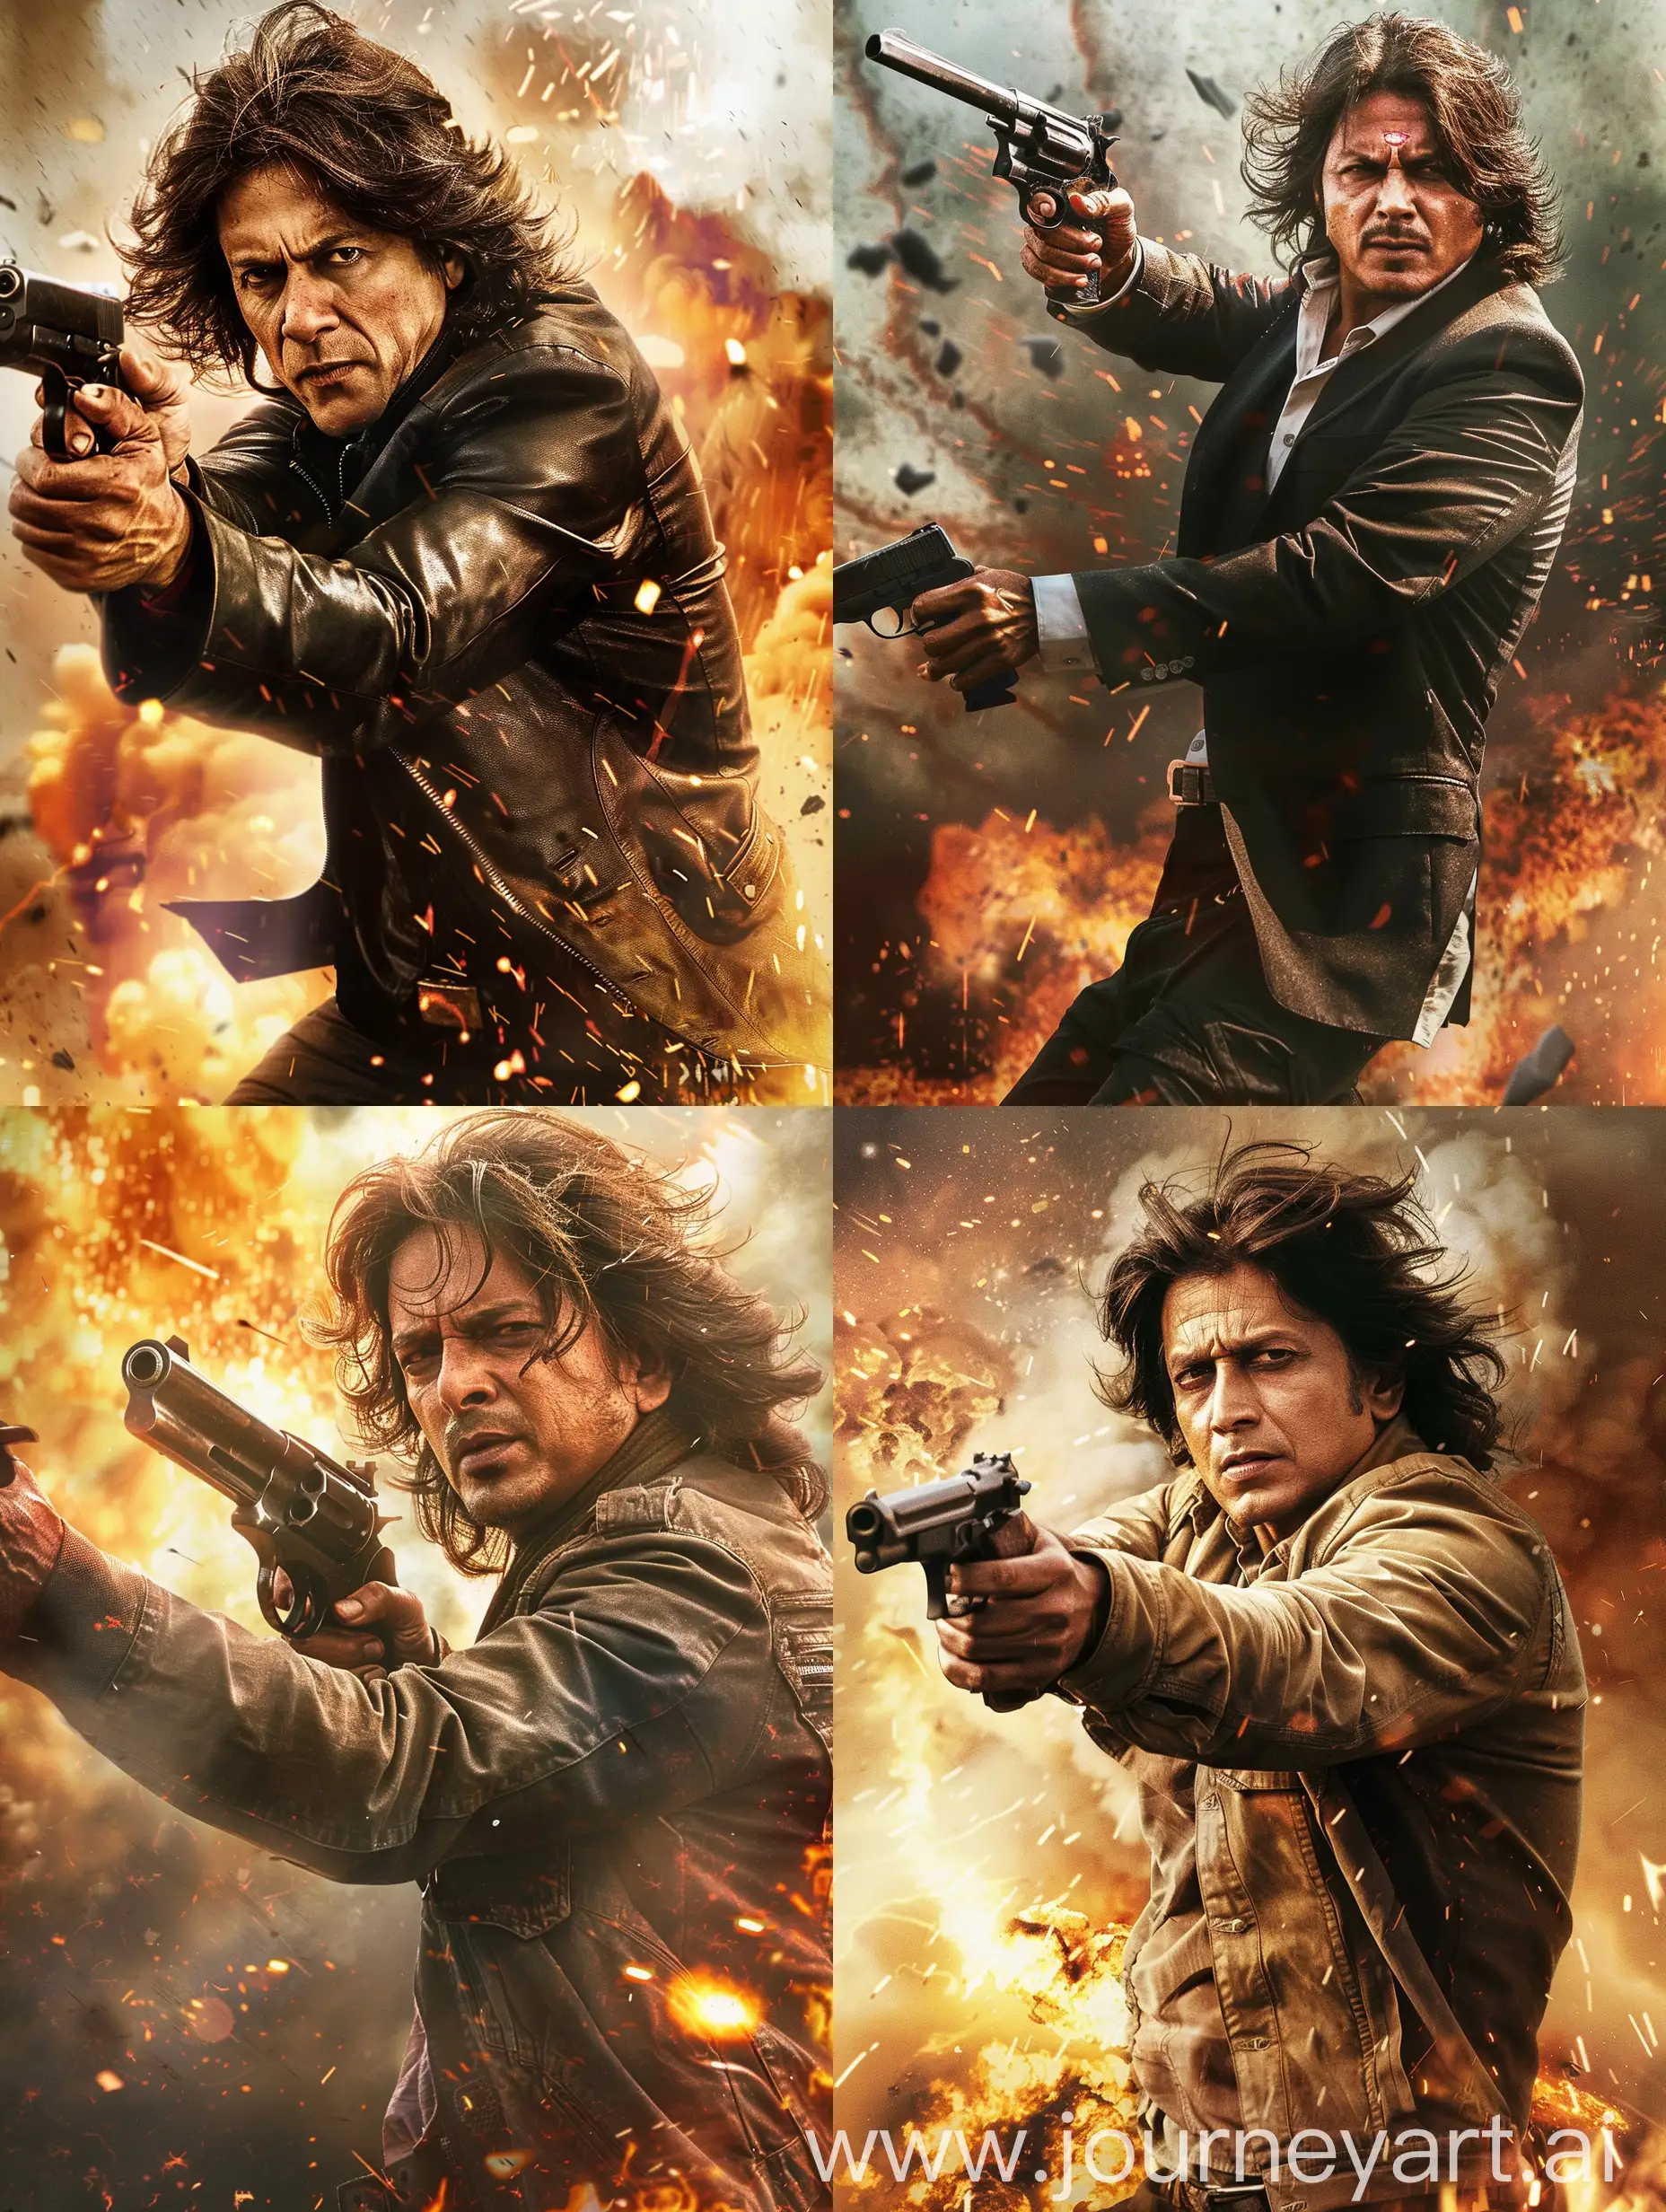 Shahrukh-Khan-Hyper-Realistic-Film-Poster-Action-Pose-with-Explosions-and-Shotgun